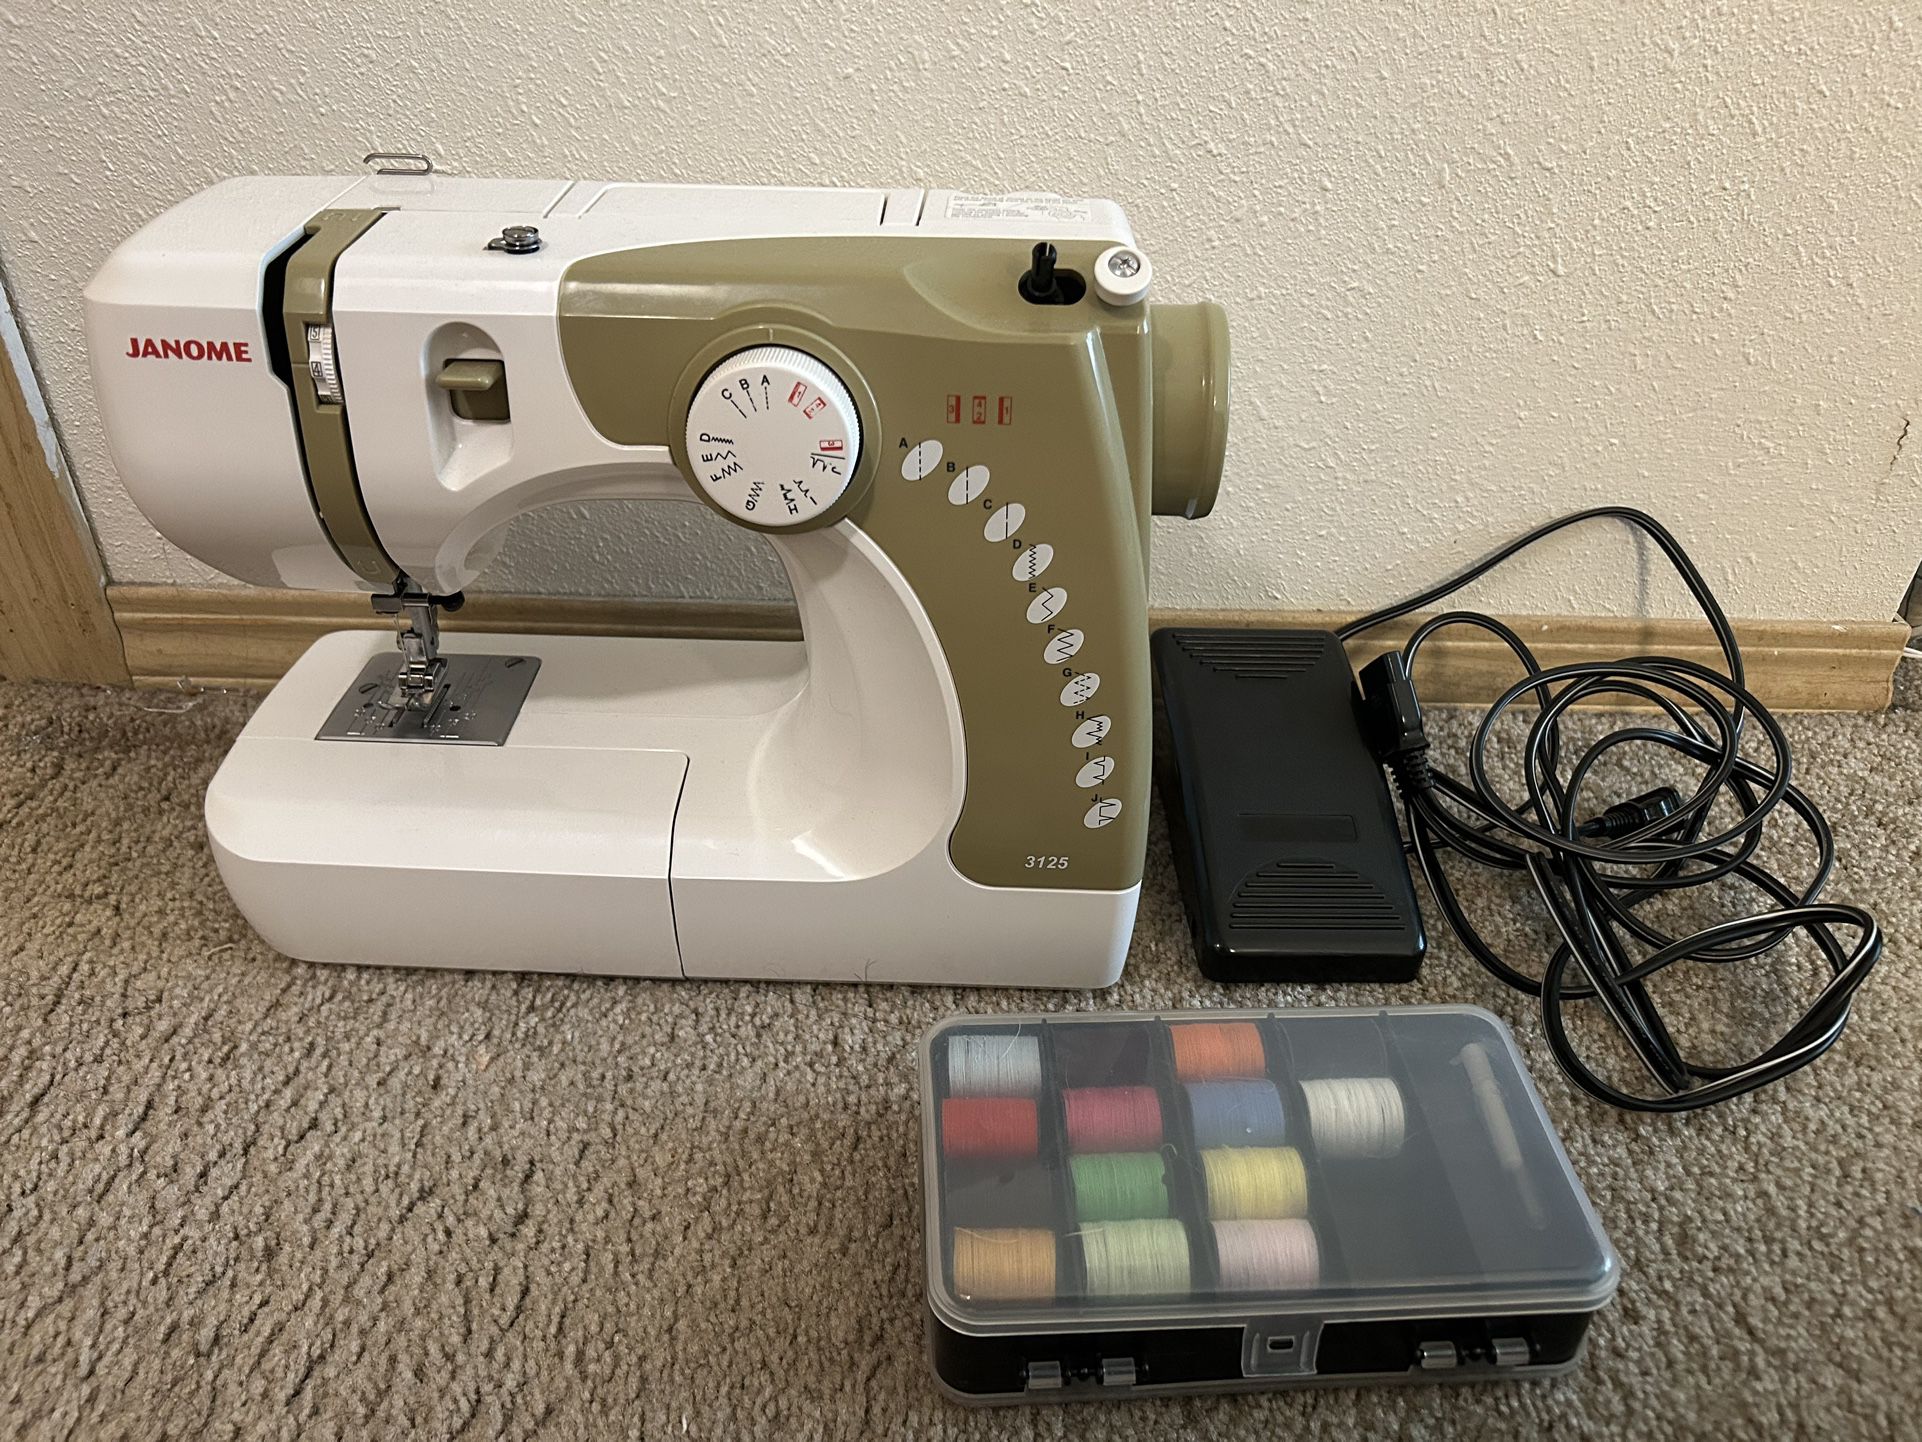 Sewing Machine Janome HD1000 for Sale in Aloha, OR - OfferUp